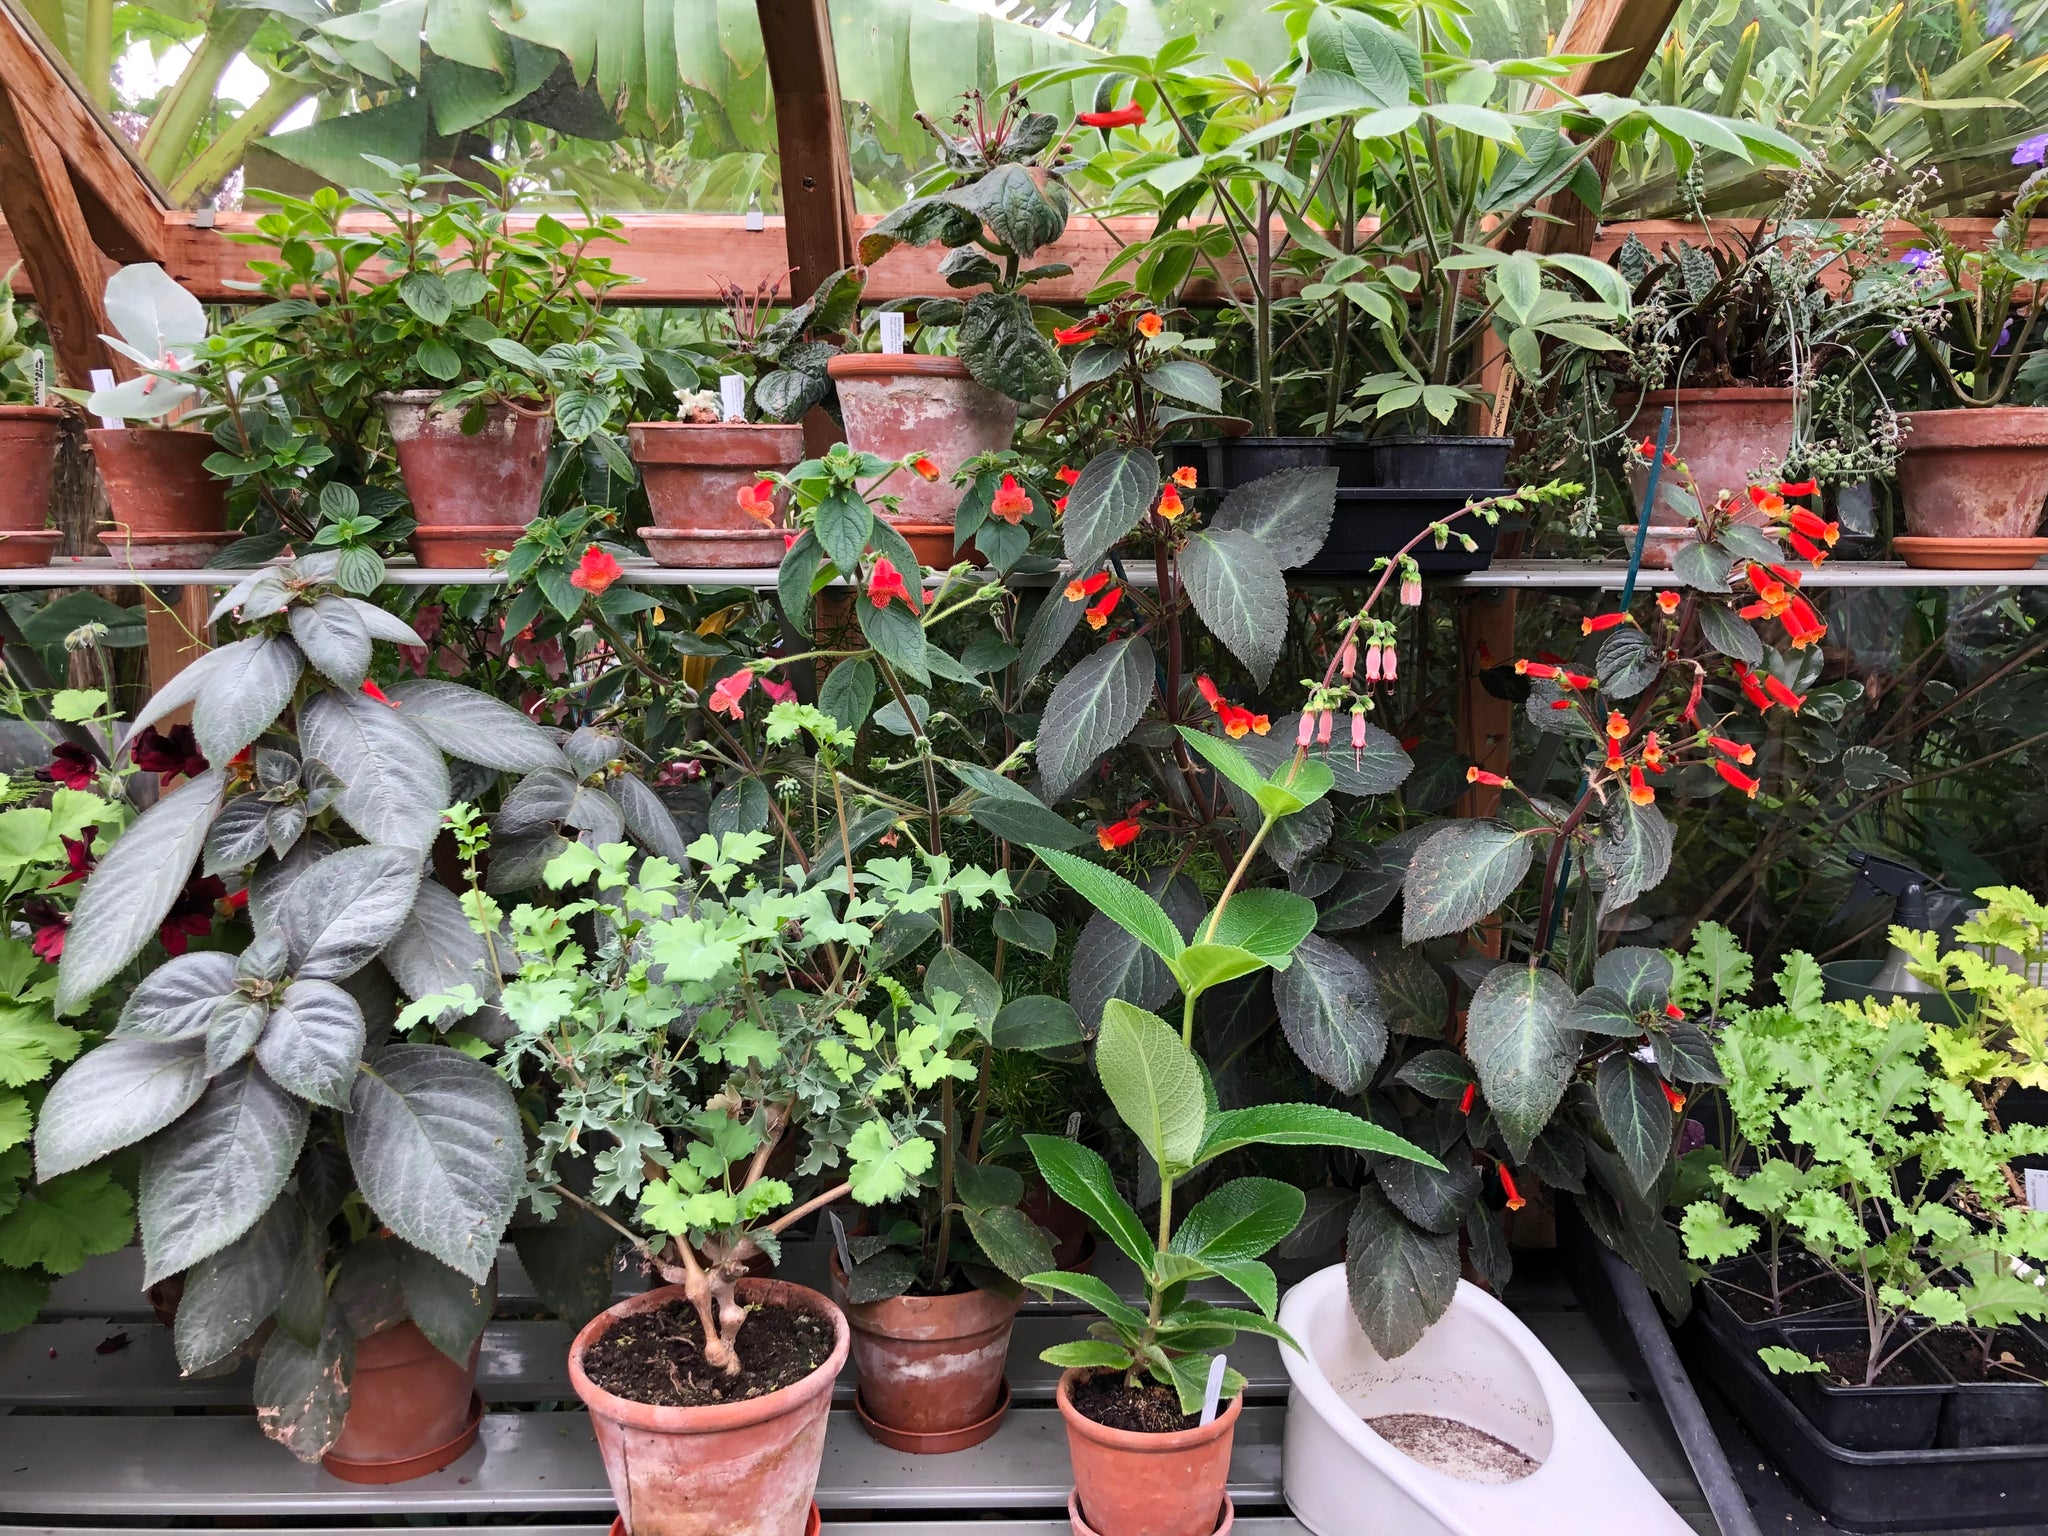 Tender plants in a greenhouse